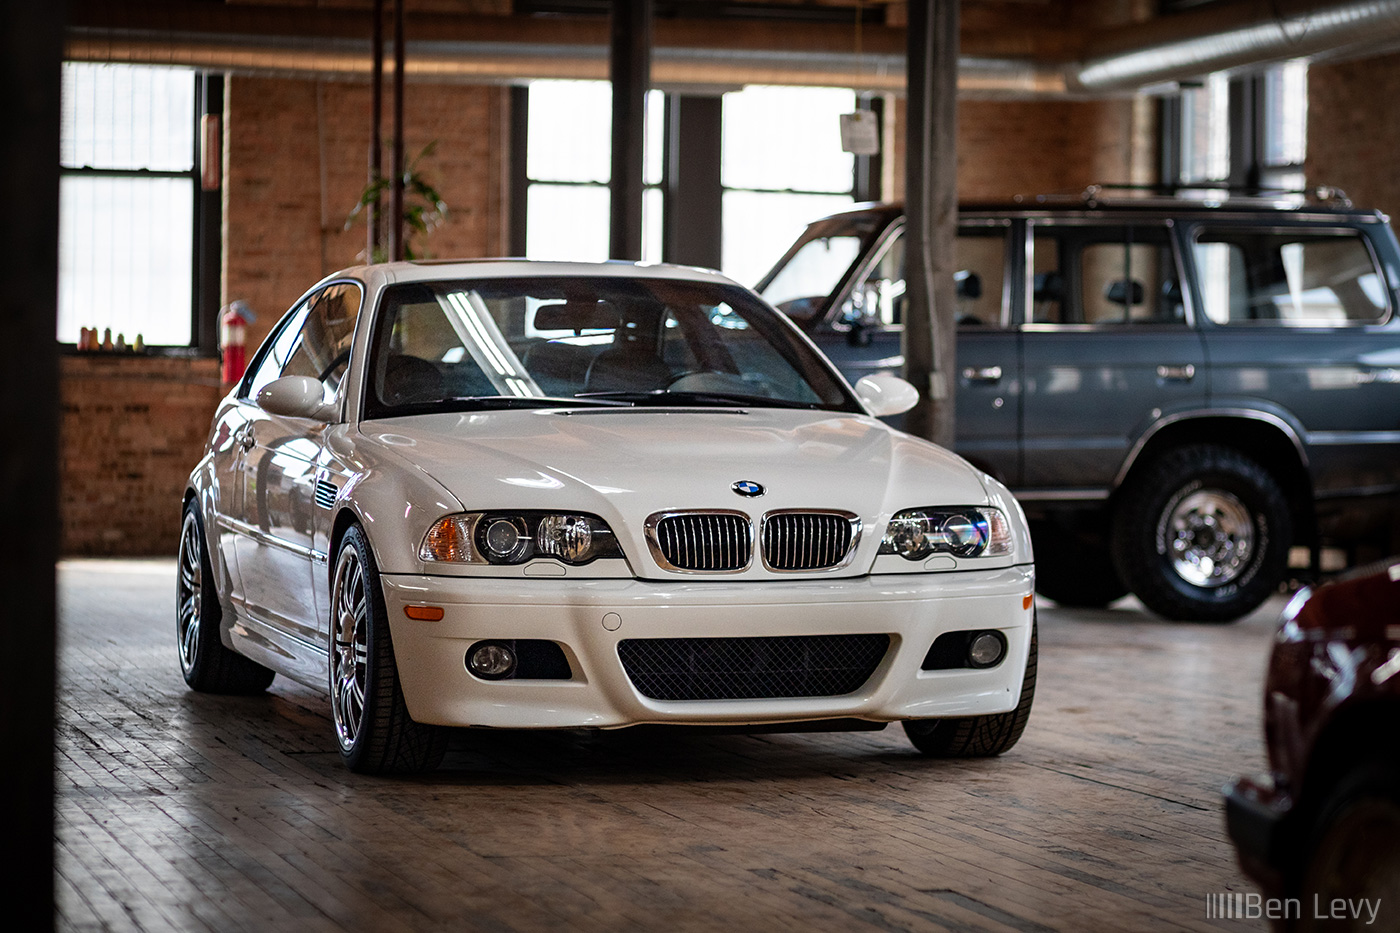 Clean White E46 M3 on Display at The Outfit in Chicago